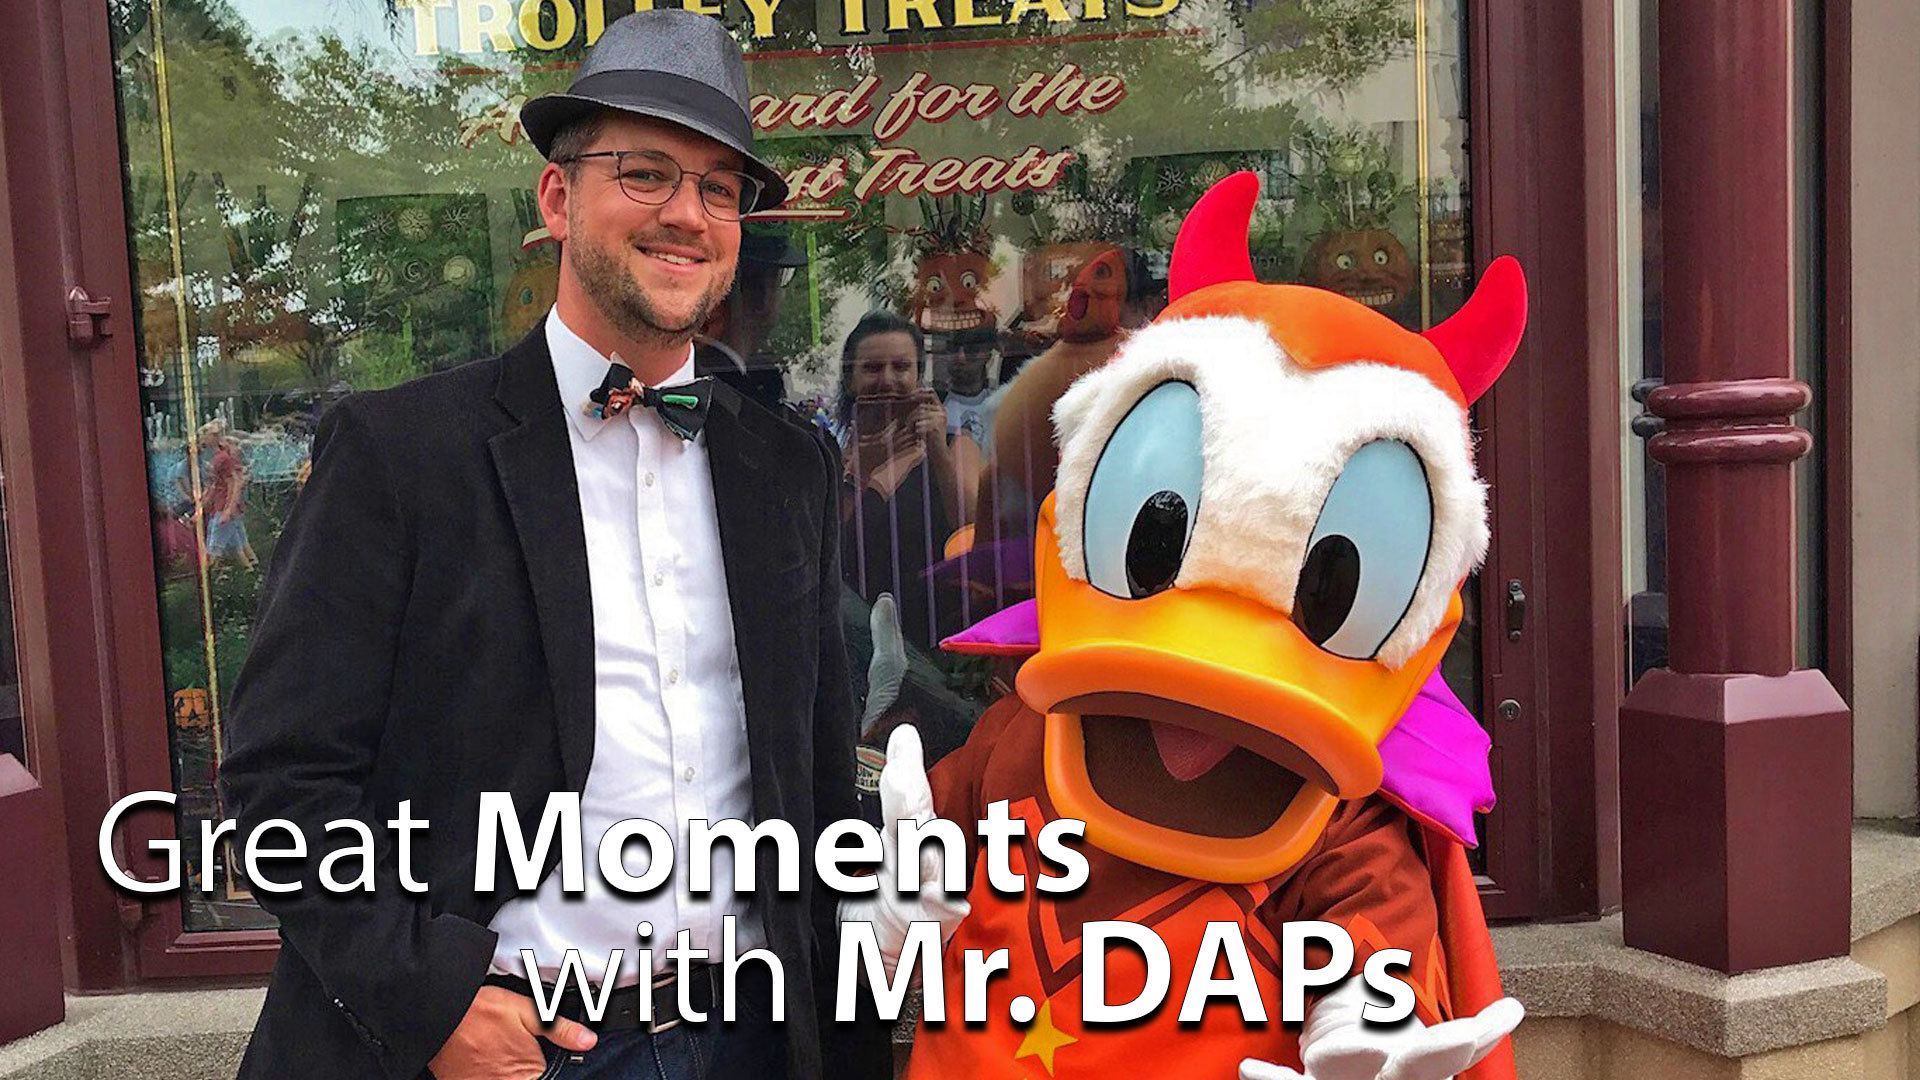 SCAREolers, EPCOT, THOR, and more! – Great Moments with Mr. DAPs